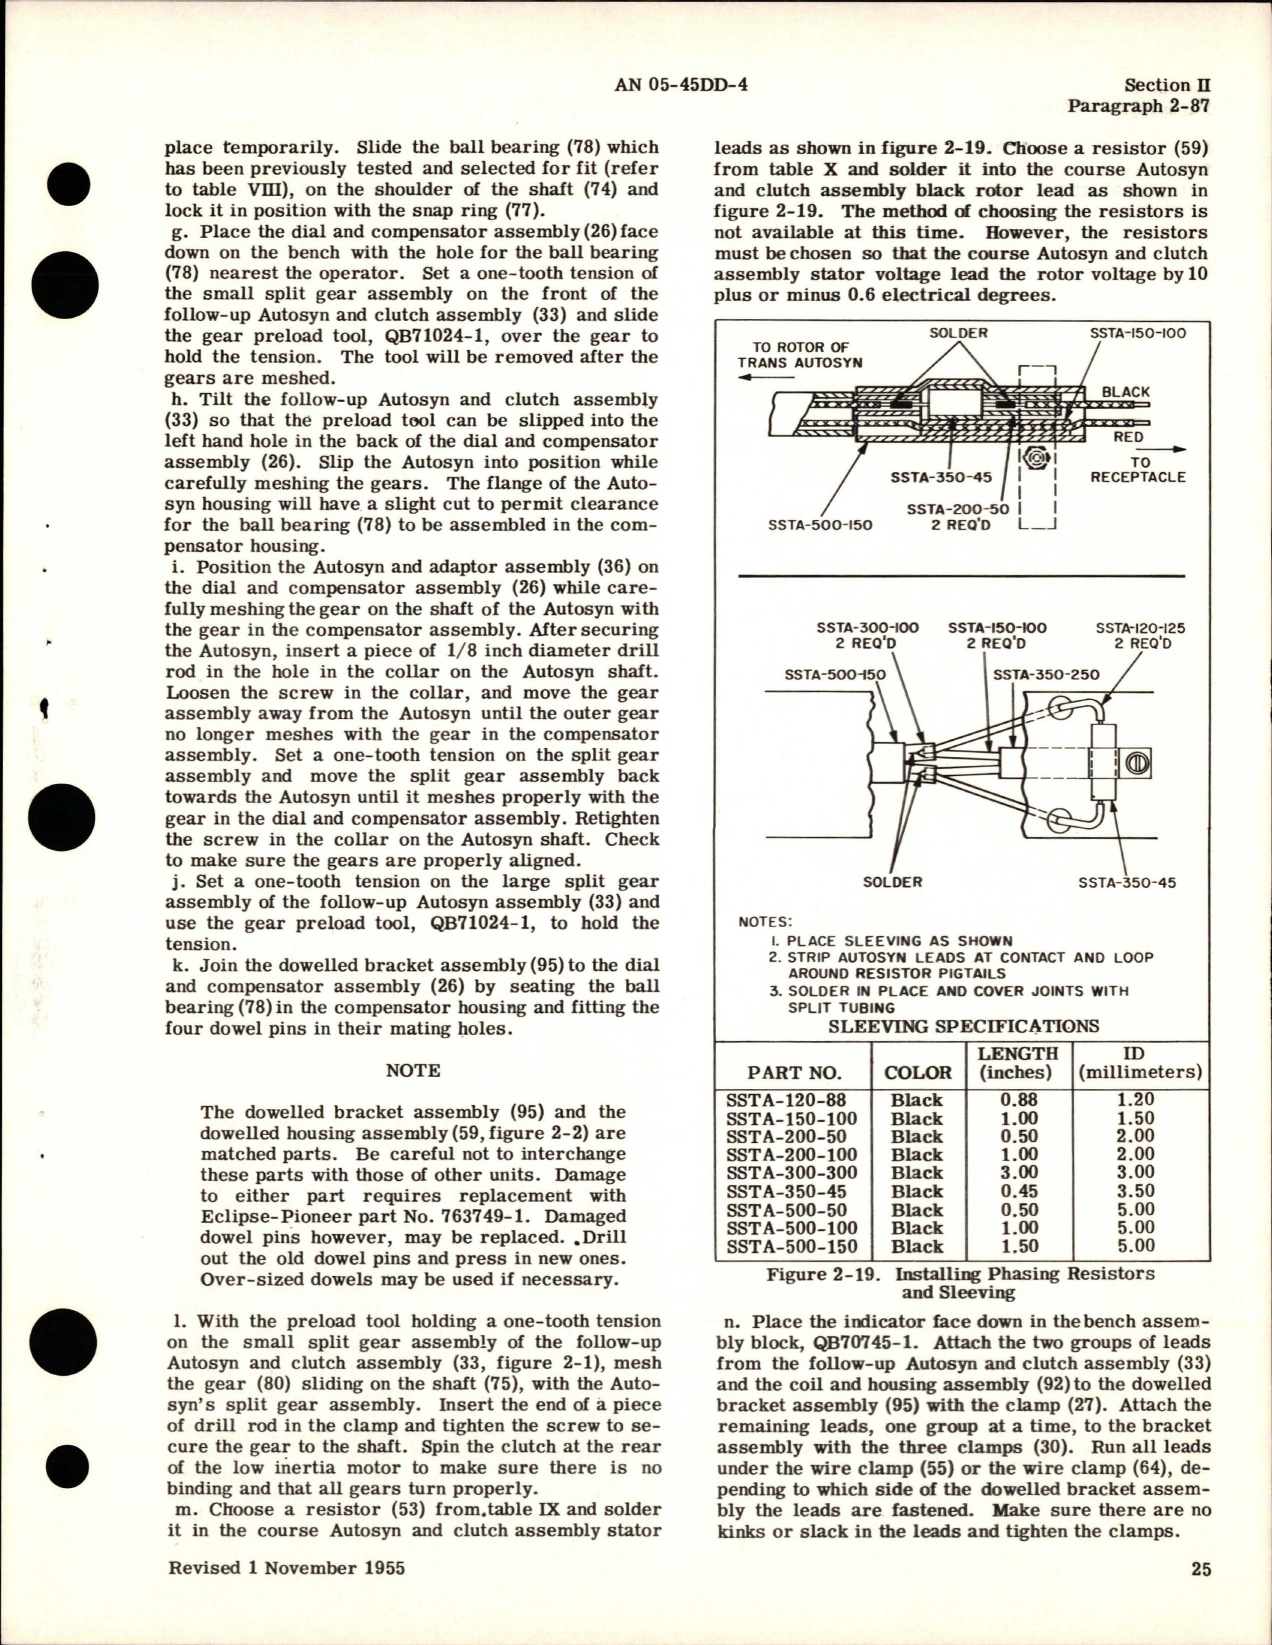 Sample page 5 from AirCorps Library document: Overhaul Instructions for Master Direction Indicator - Parts 12013-2H-E, 12013-2H-L, and 12013-5B-L1